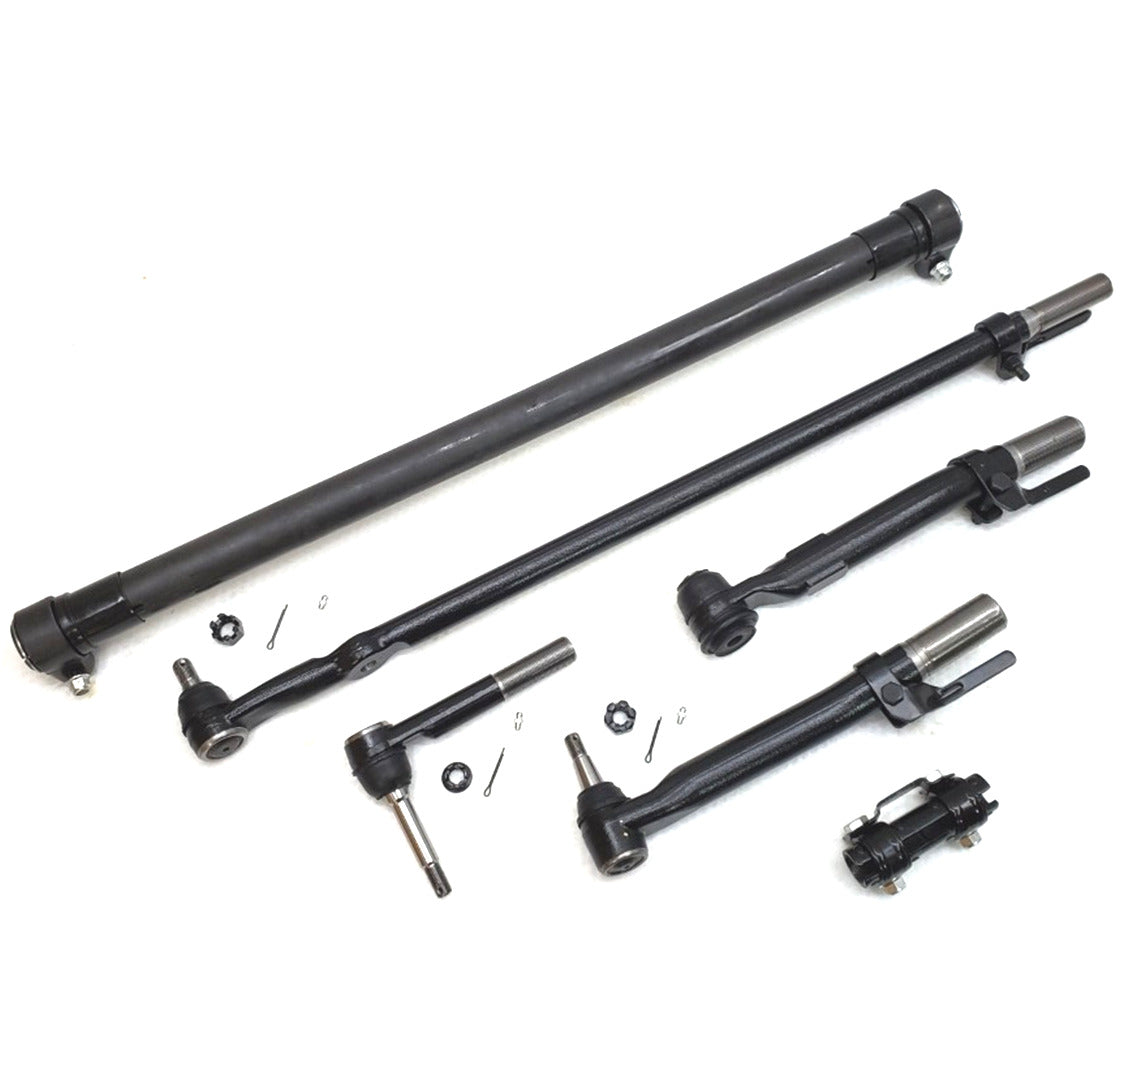 HD Tie Rods Drag Link Sleeves Steering Kit for 2011-2016 Ford F250, F350 4x4 SRW